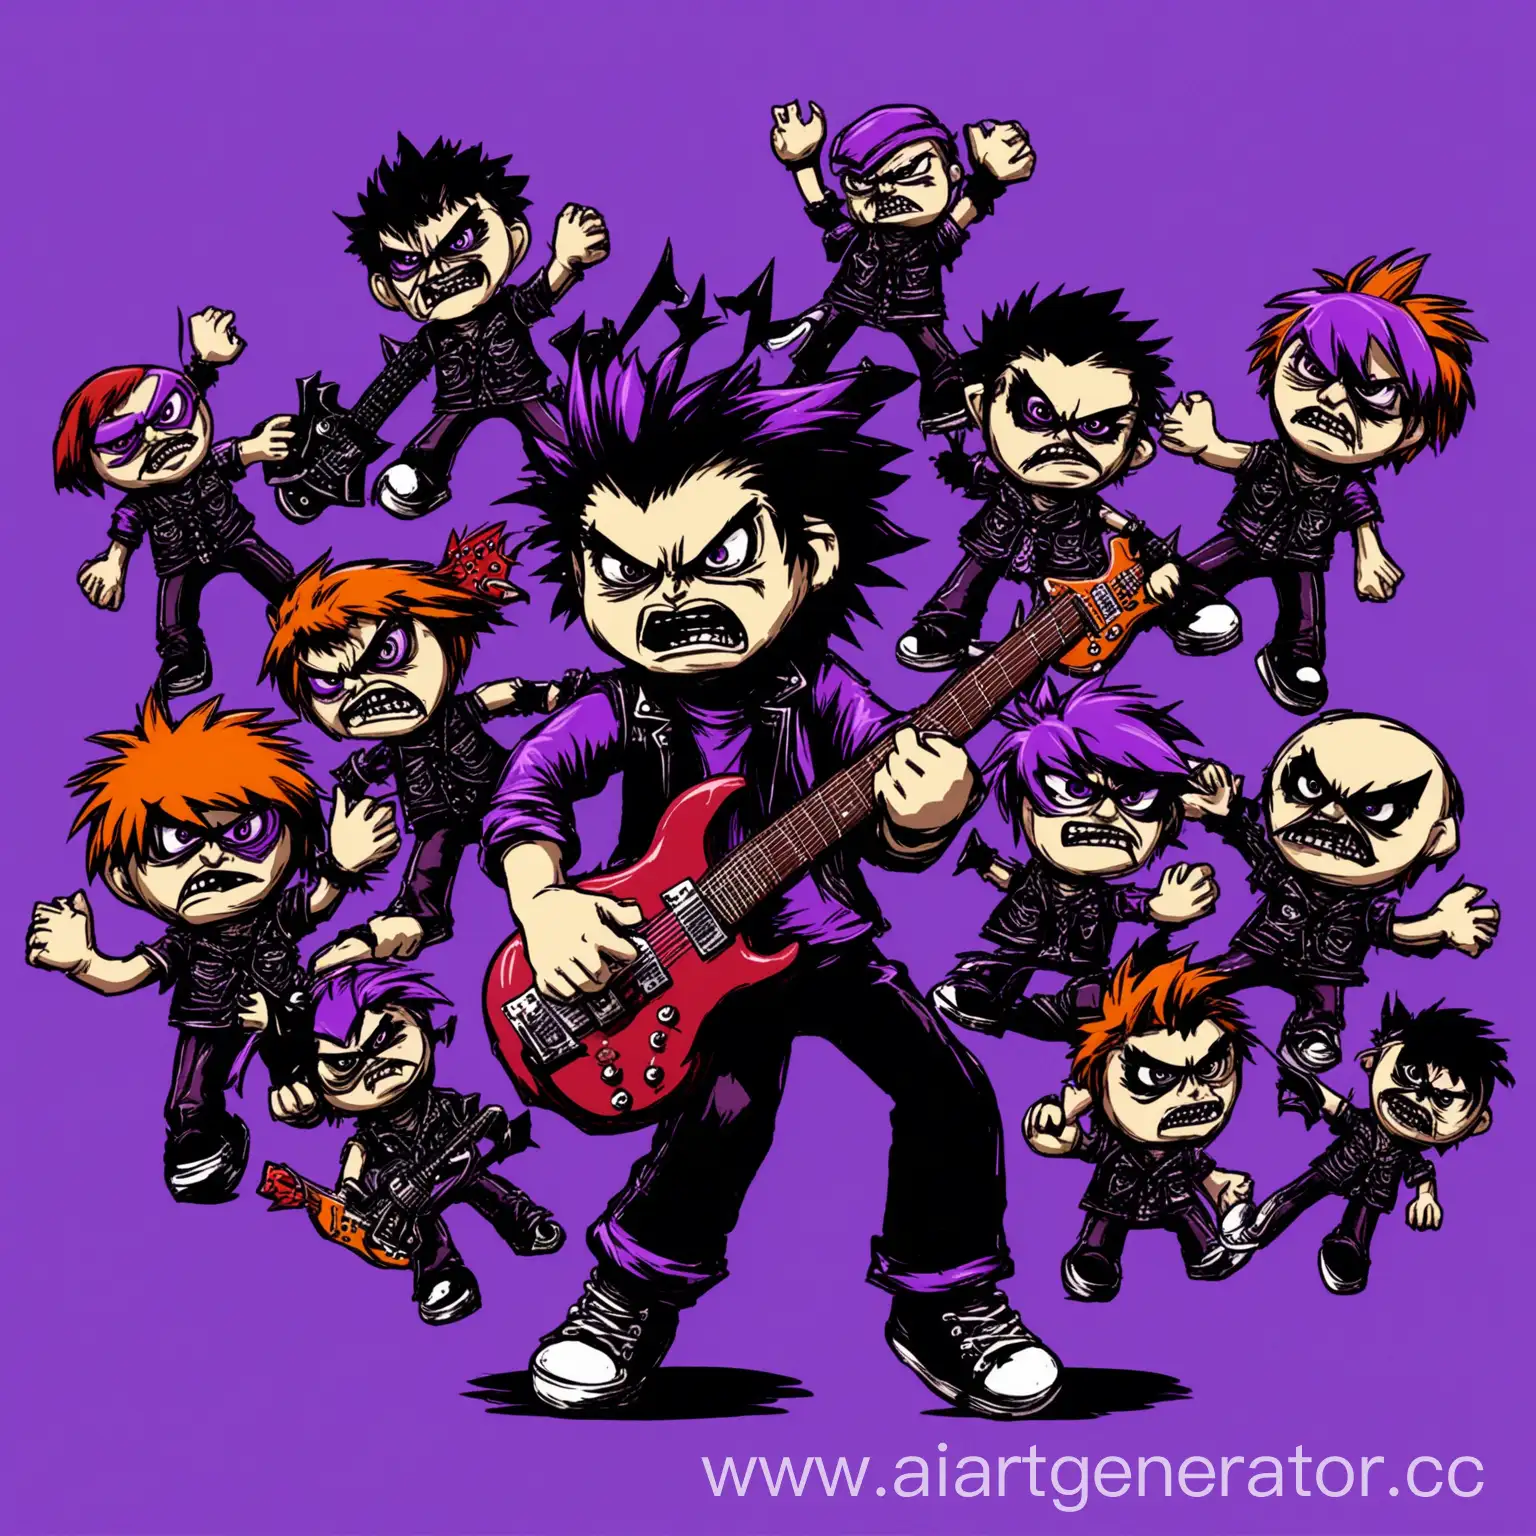 Angry mettalist rocker kid controlling a lot of puppets, logo without text, purple background